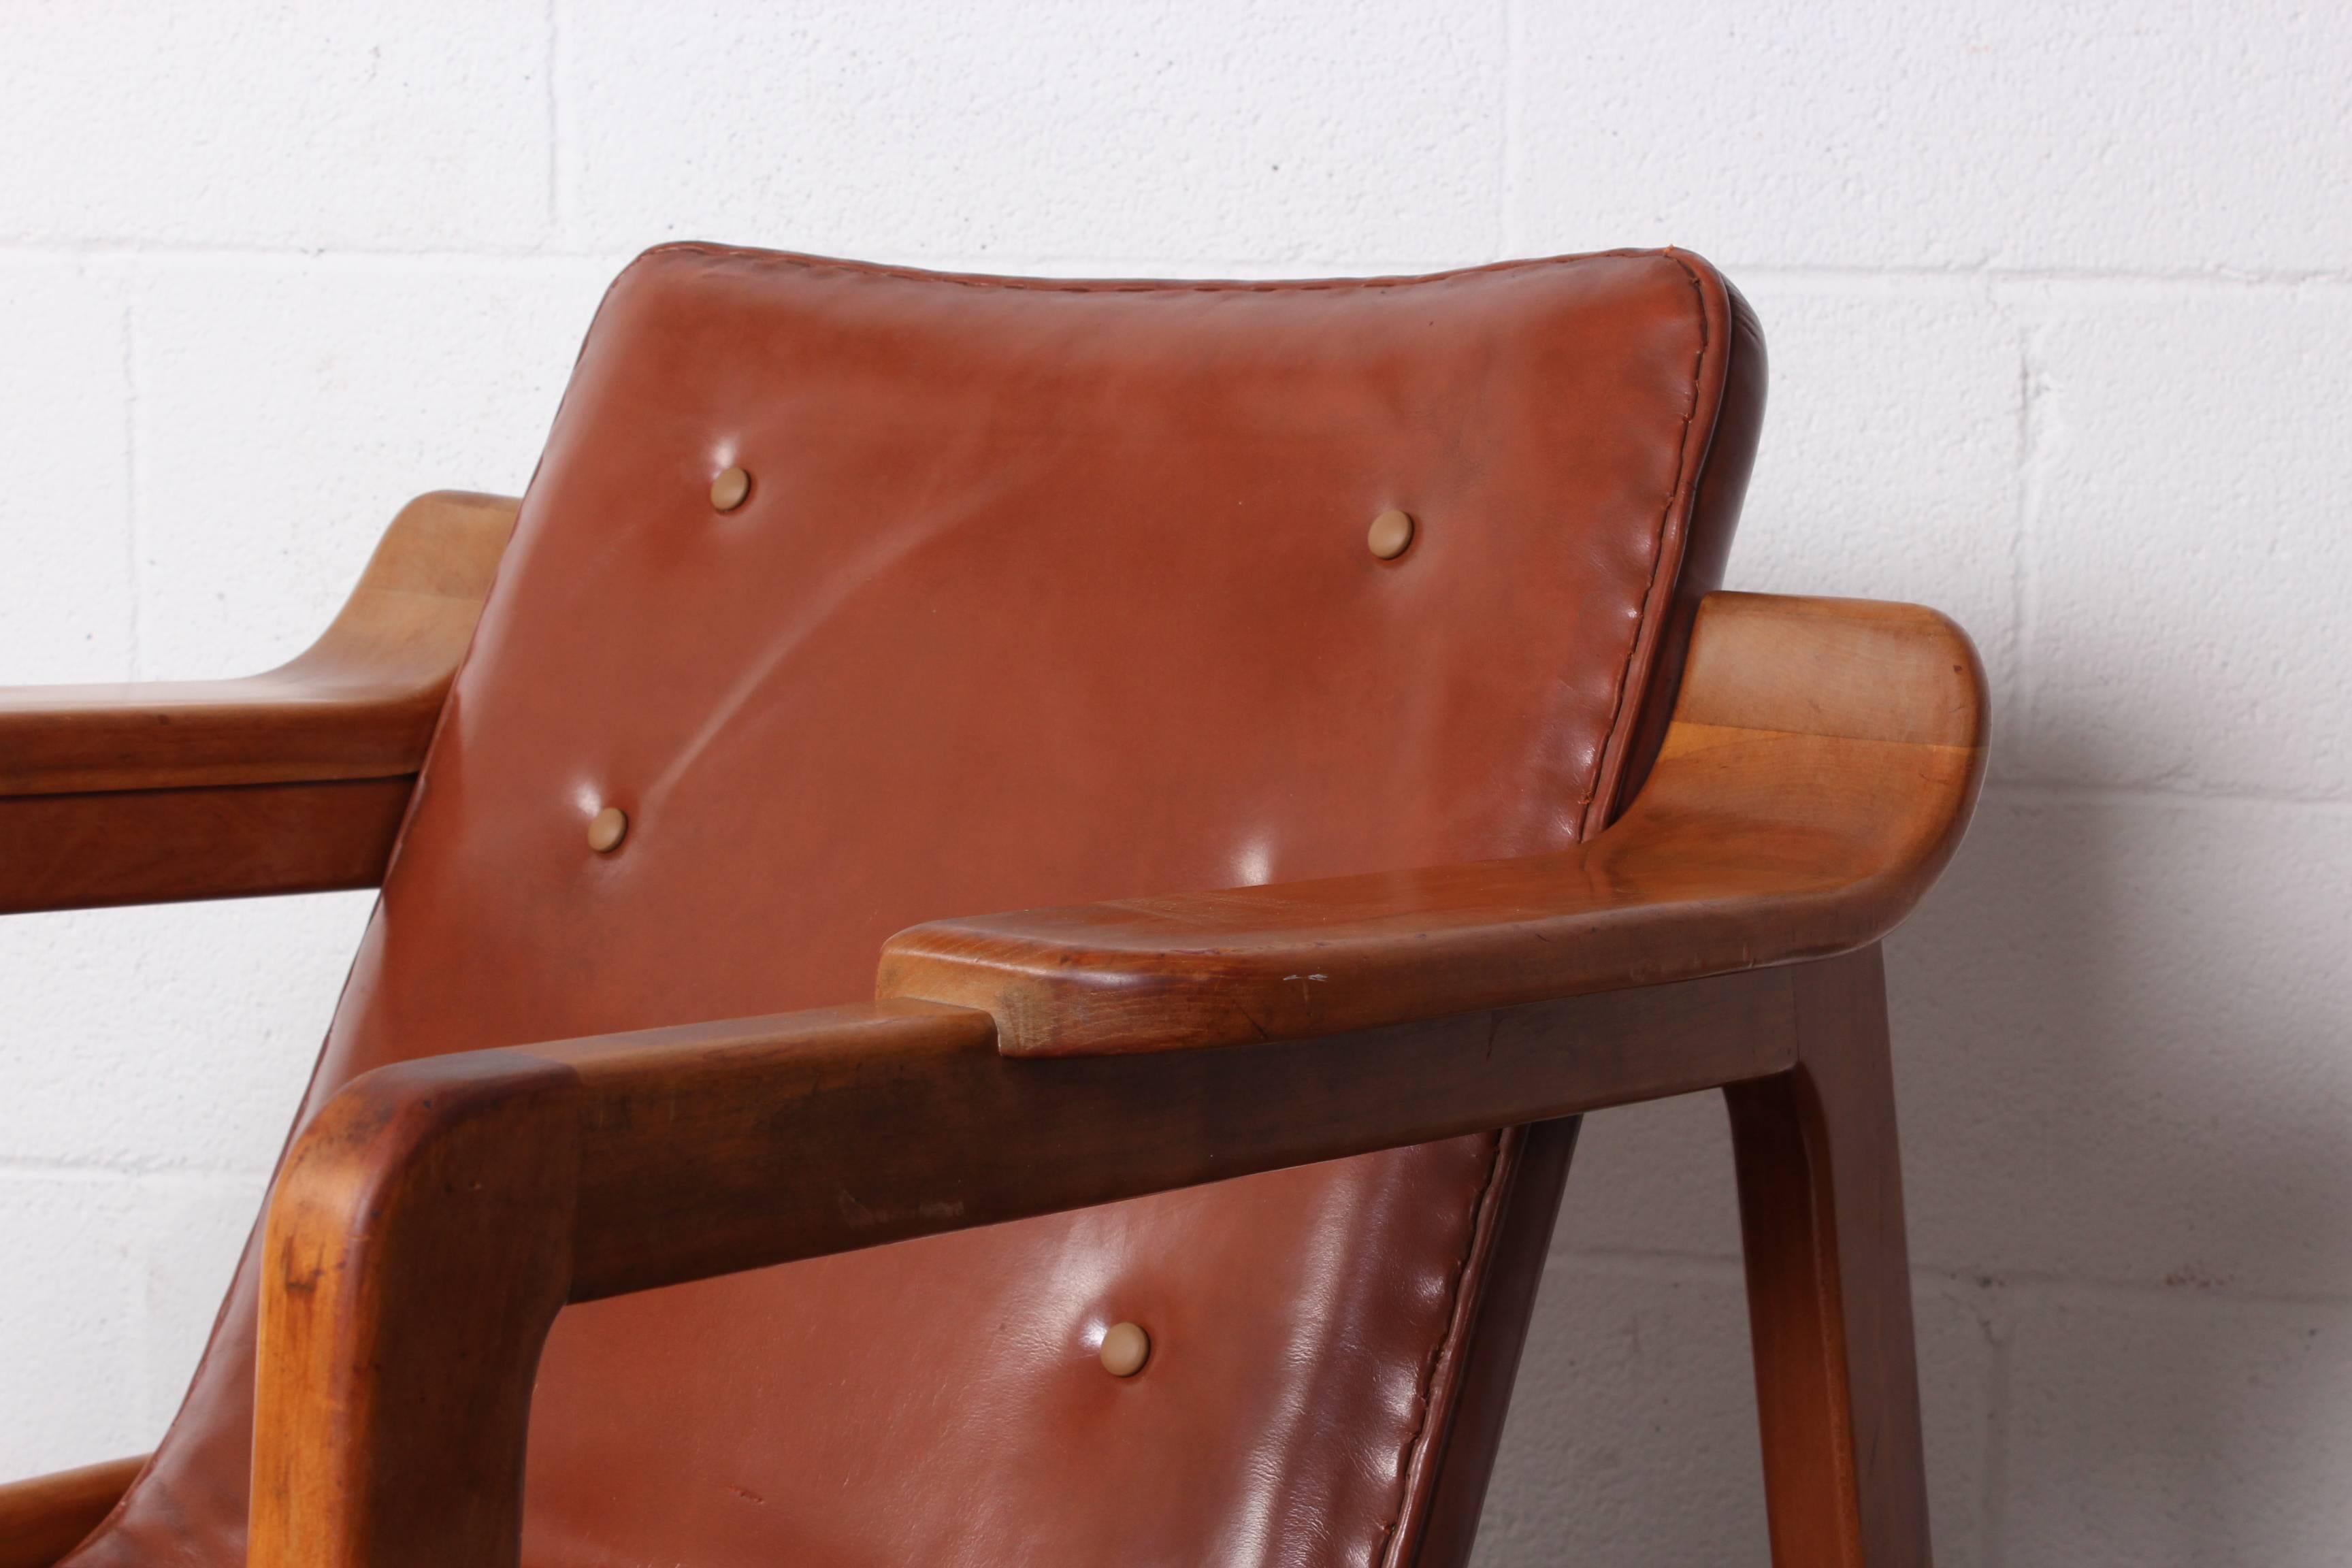 Tove & Edvard Kindt-Larsen 'Fireplace' Lounge Chair in Original Leather 3